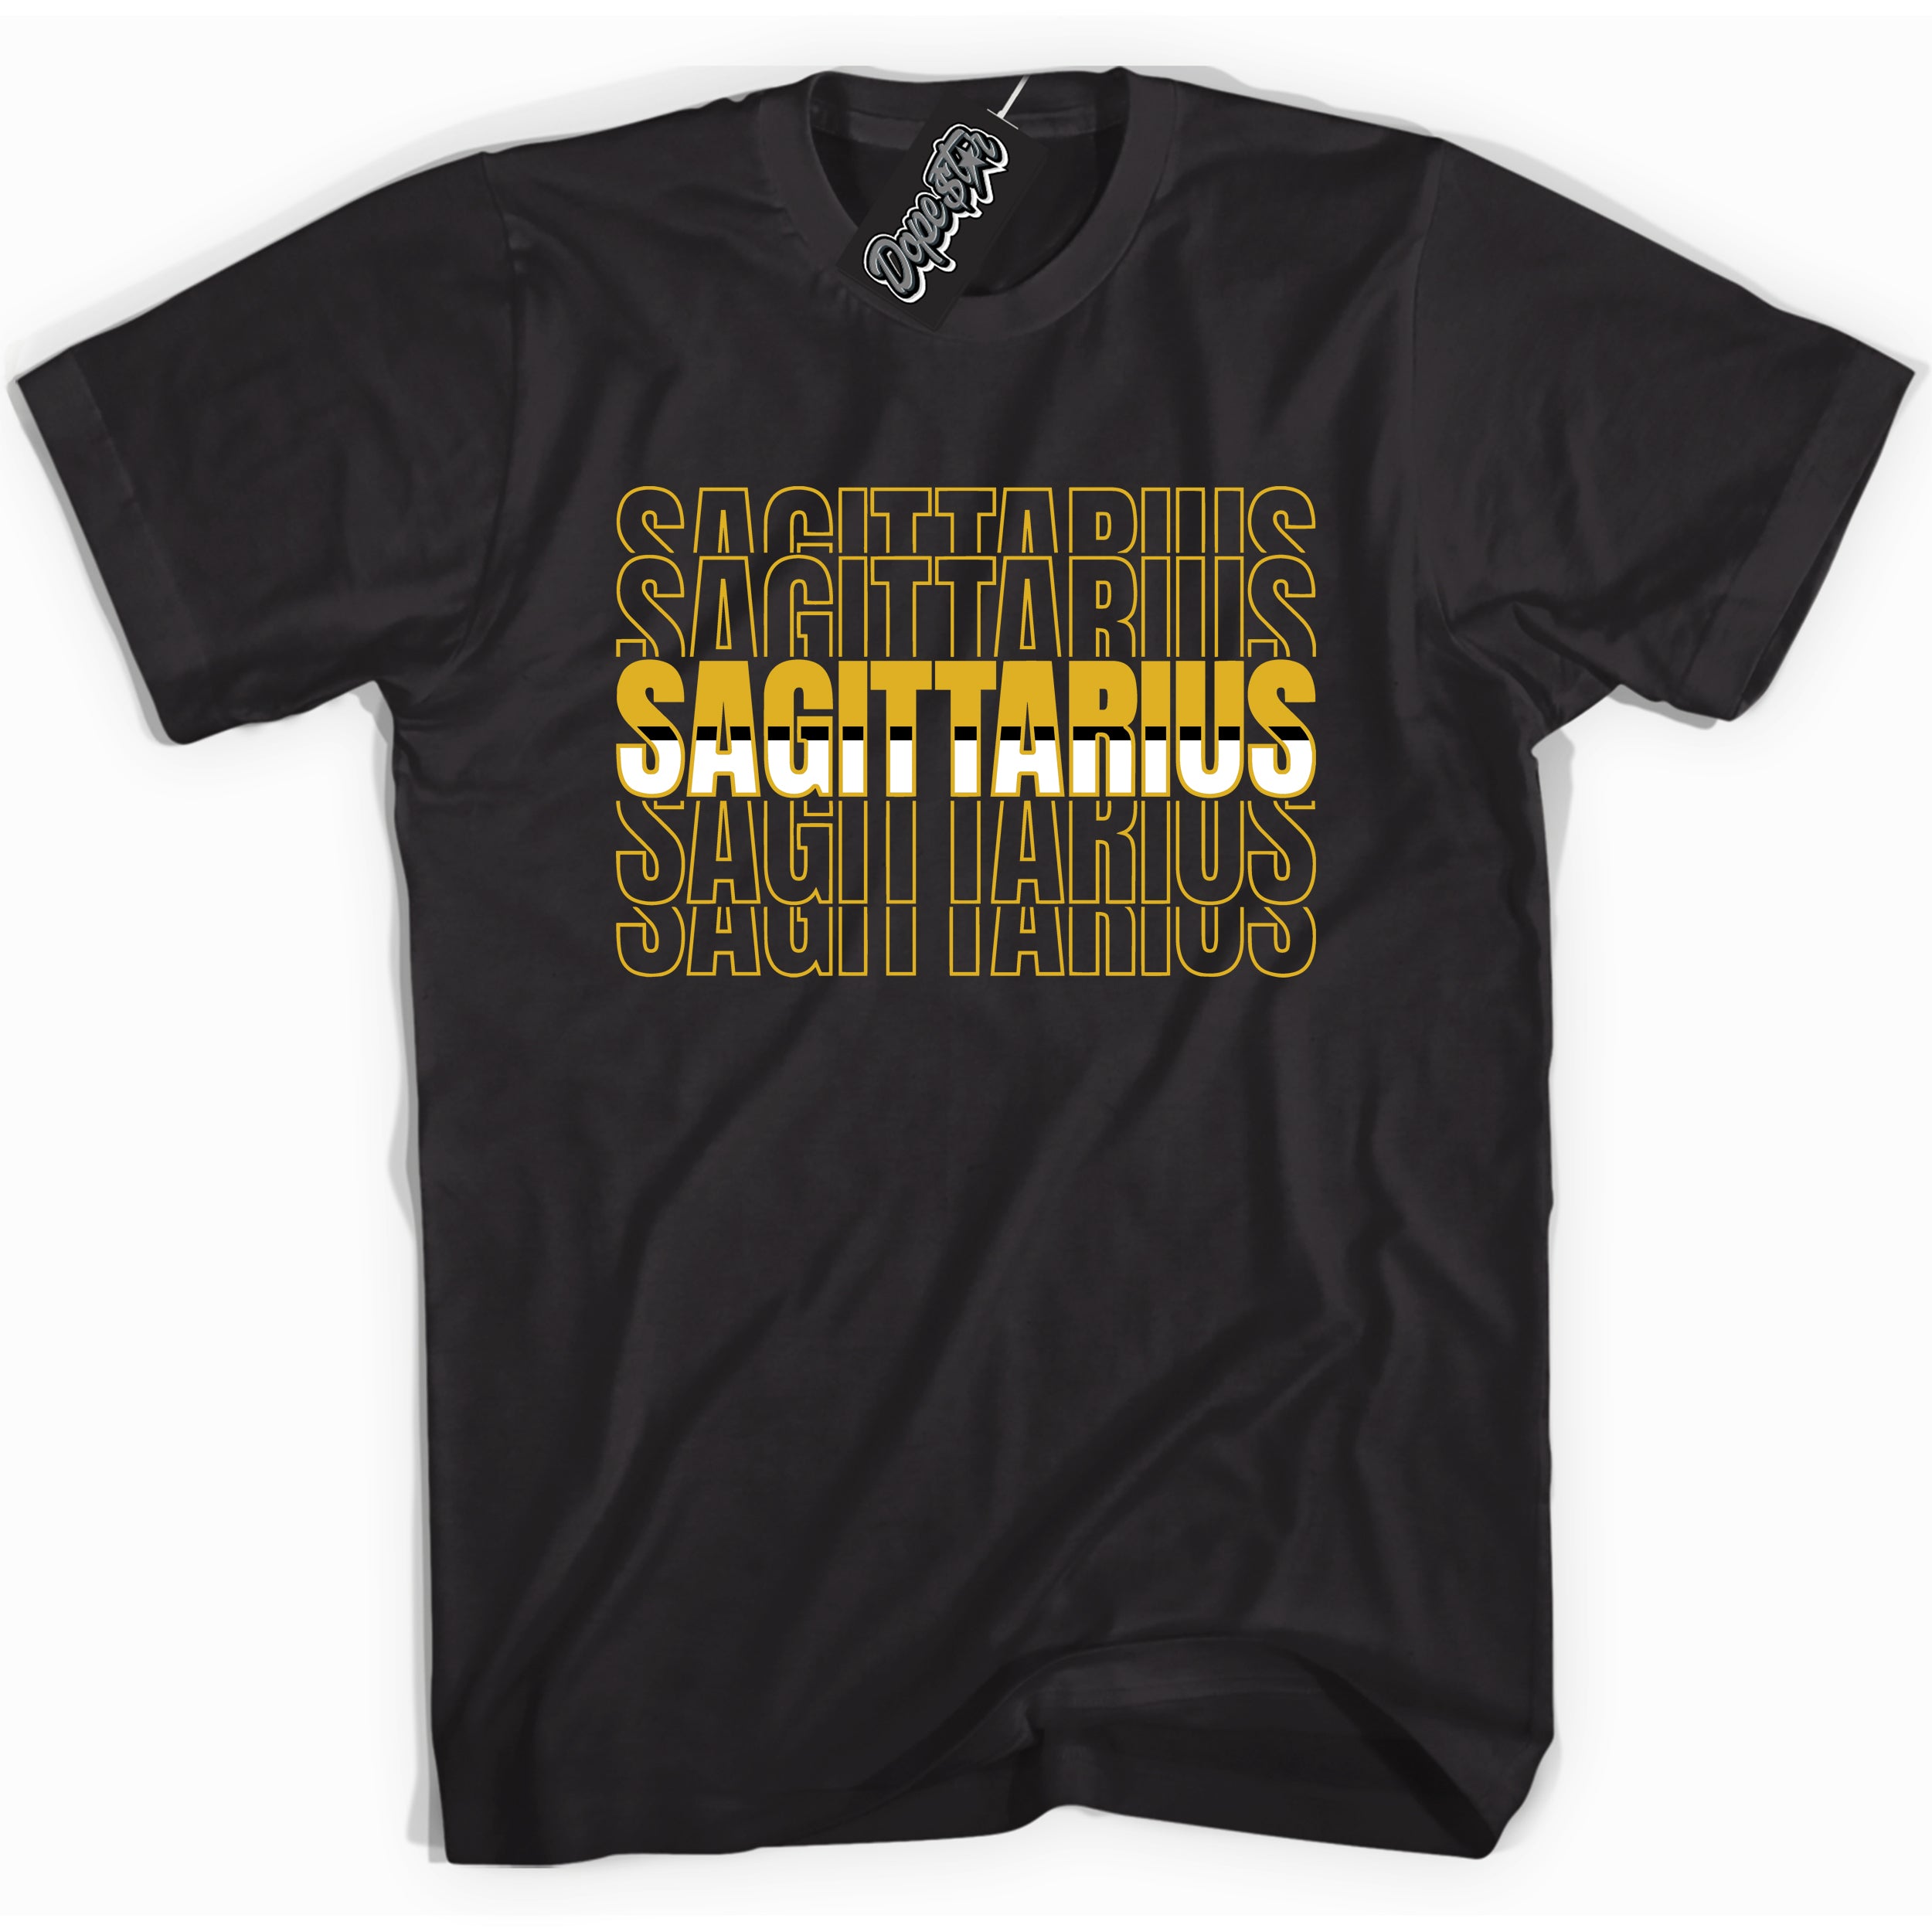 Cool Black Shirt with “ Sagittarius” design that perfectly matches Yellow Ochre 6s Sneakers.